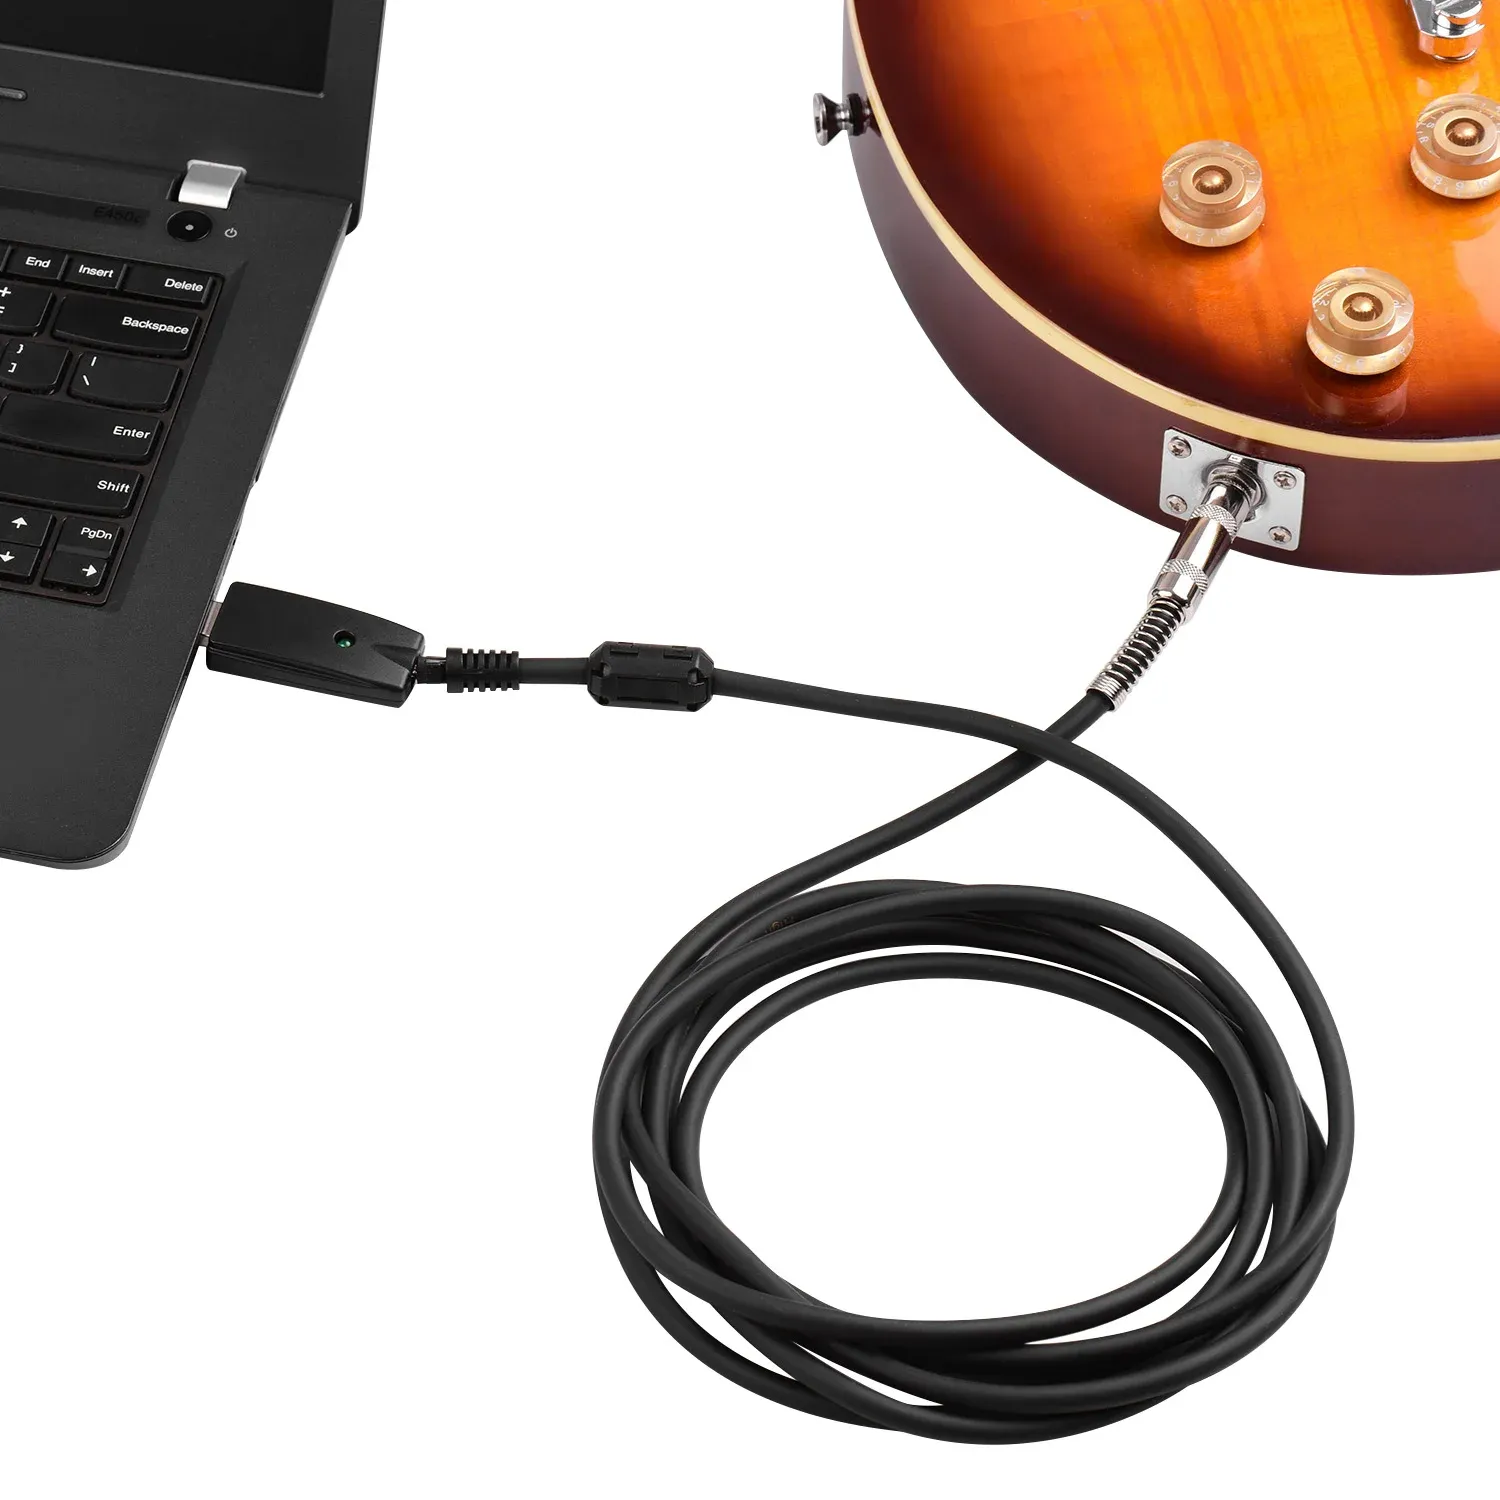 Kablar USB Guitar Andio Cable USB Manlig gränssnitt till 6,35 mm (1/4inch) Mono Electric Guitar Connection Cable Professional Guitar till PC